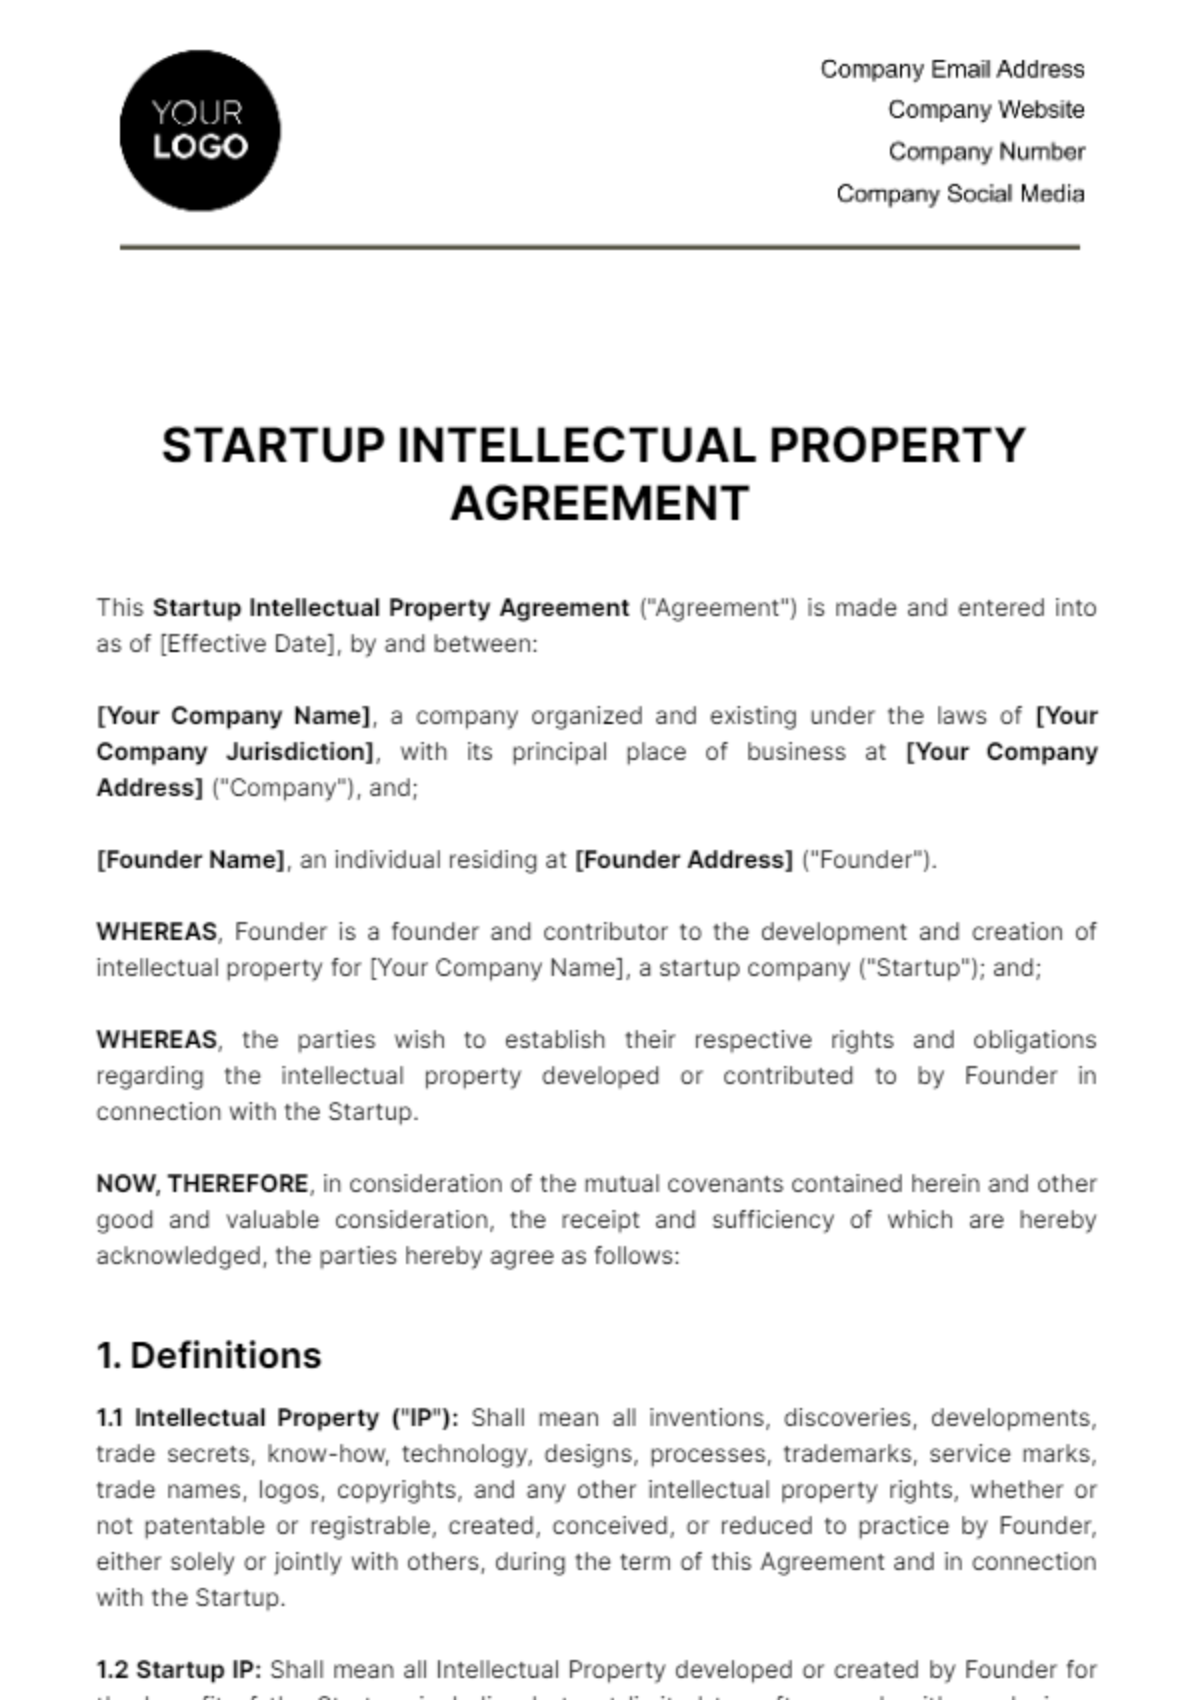 Free Startup Intellectual Property Agreement Template